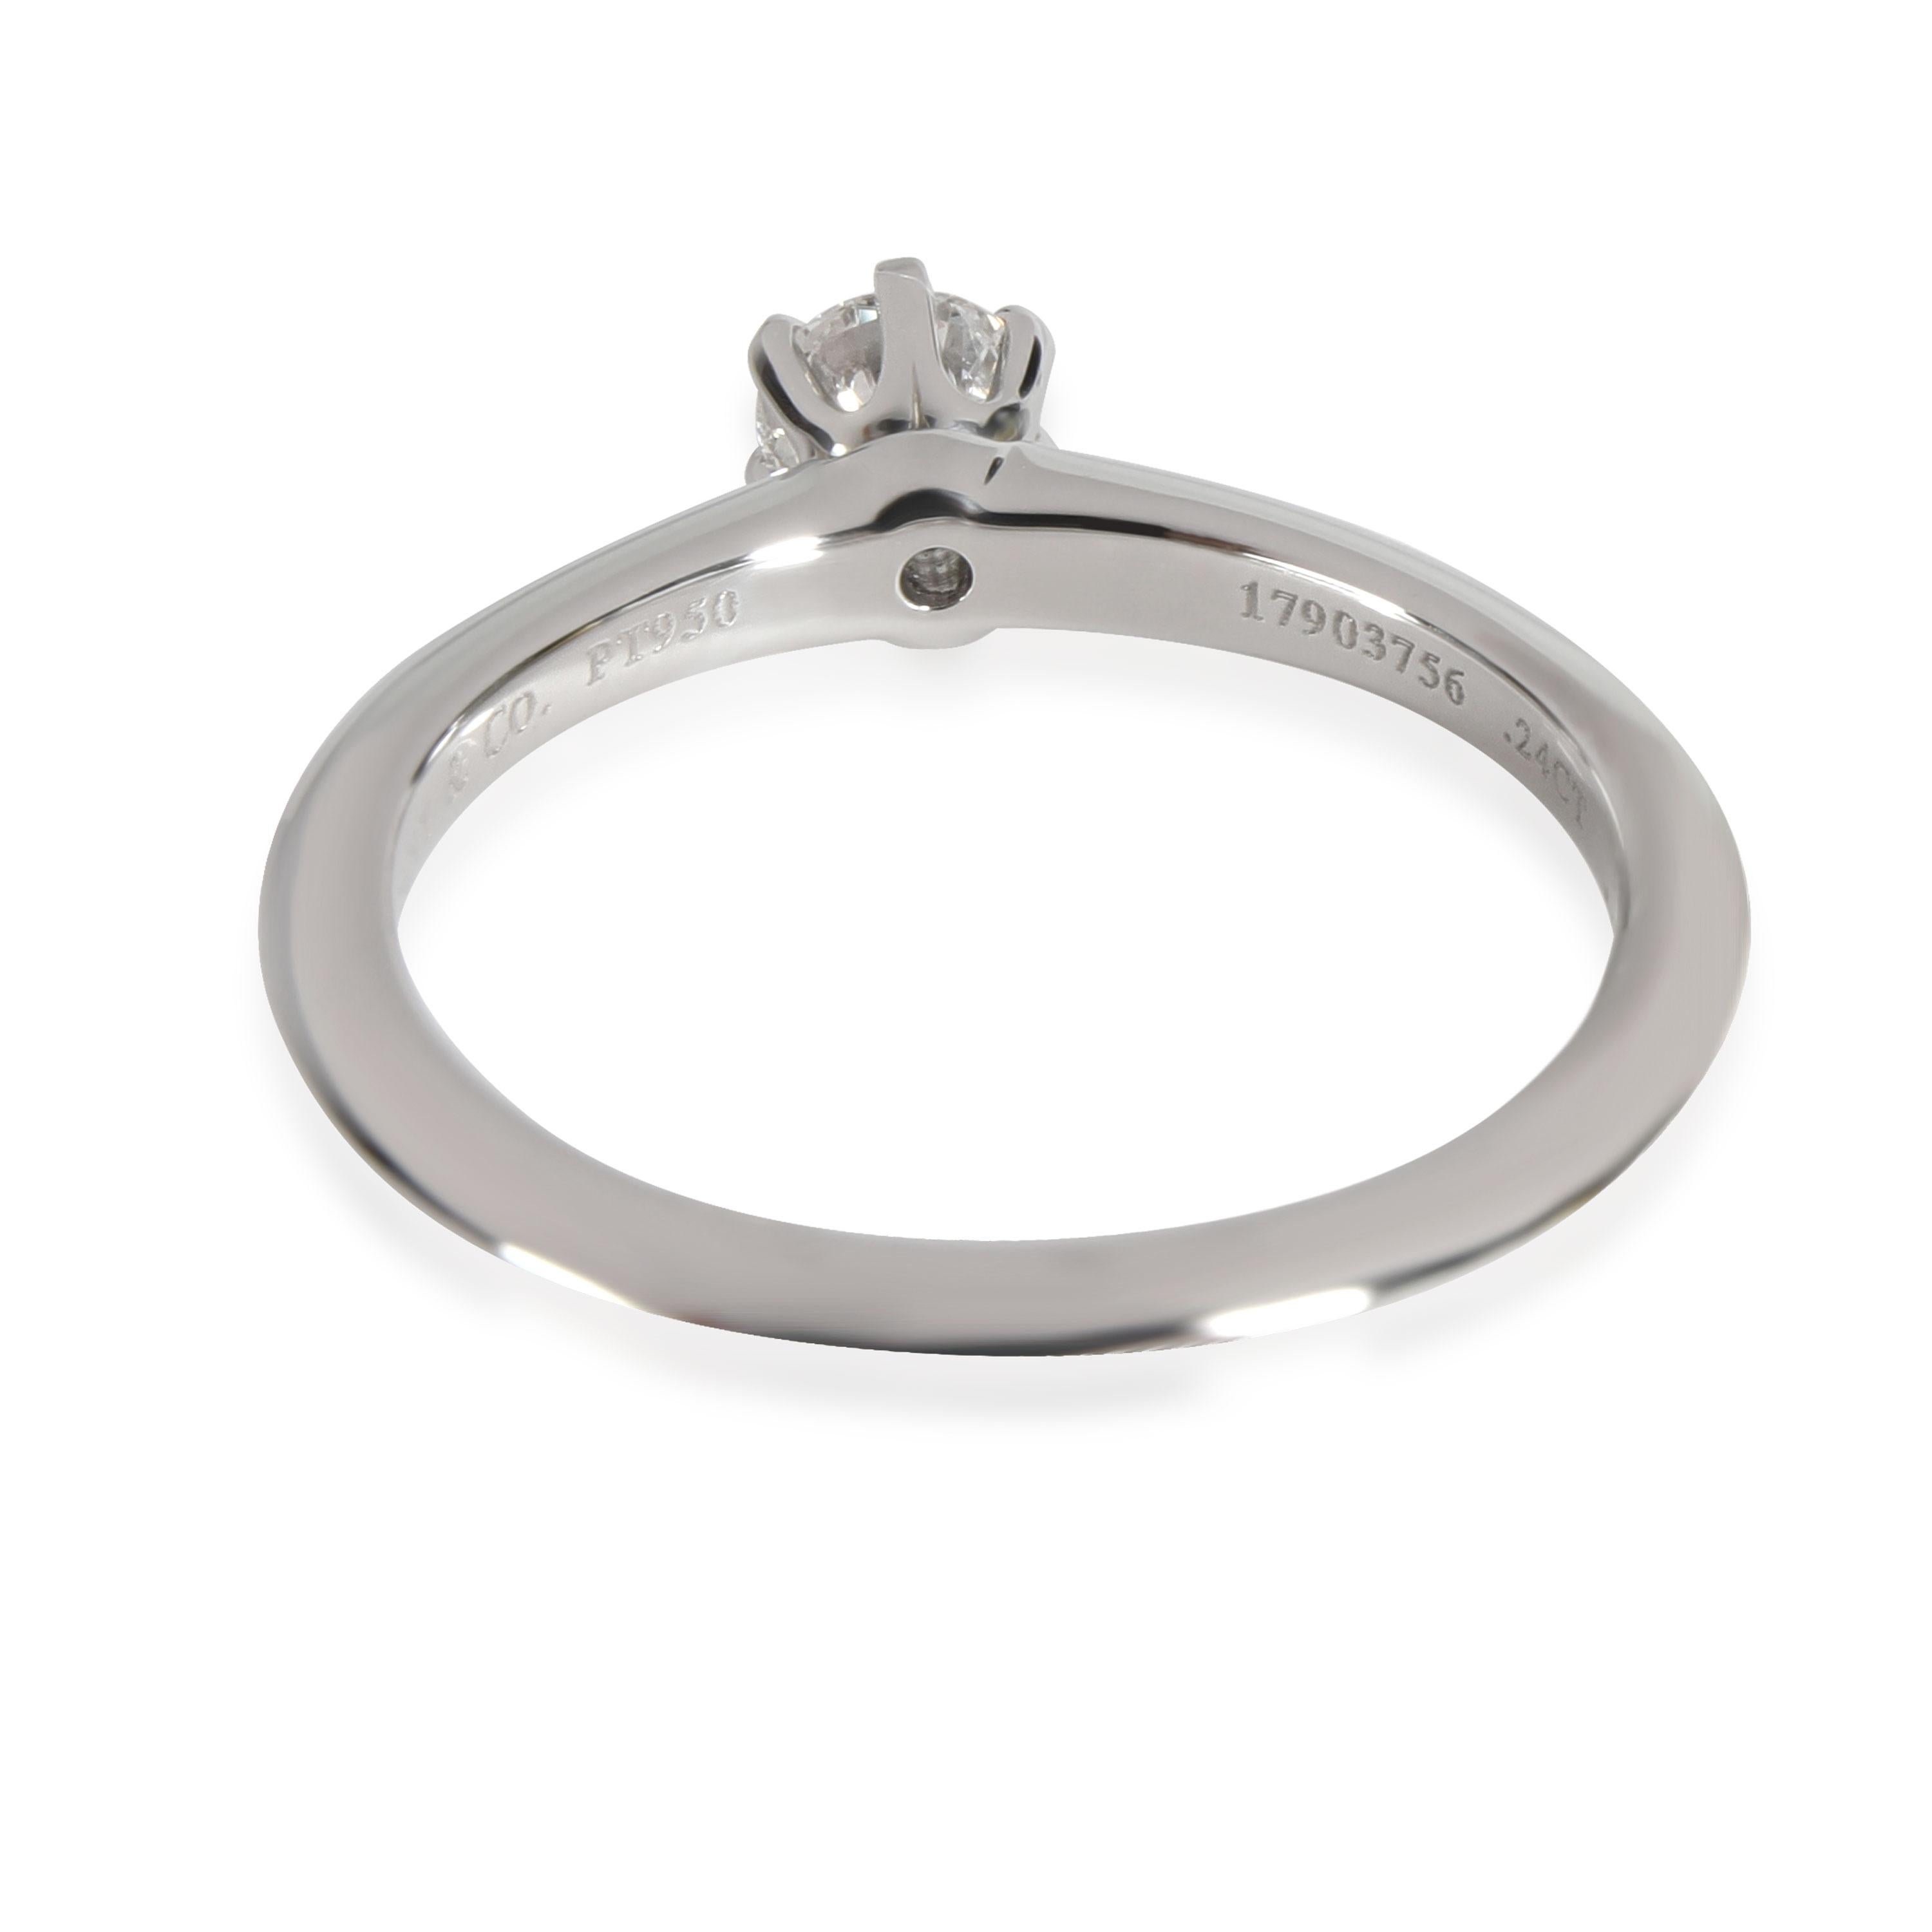 Tiffany & Co. Diamond Solitaire Engagement Ring in Platinum G VS1 0.21 CTW

PRIMARY DETAILS
SKU: 112114
Listing Title: Tiffany & Co. Diamond Solitaire Engagement Ring in Platinum G VS1 0.21 CTW
Condition Description: Retails for 1,830 USD. In